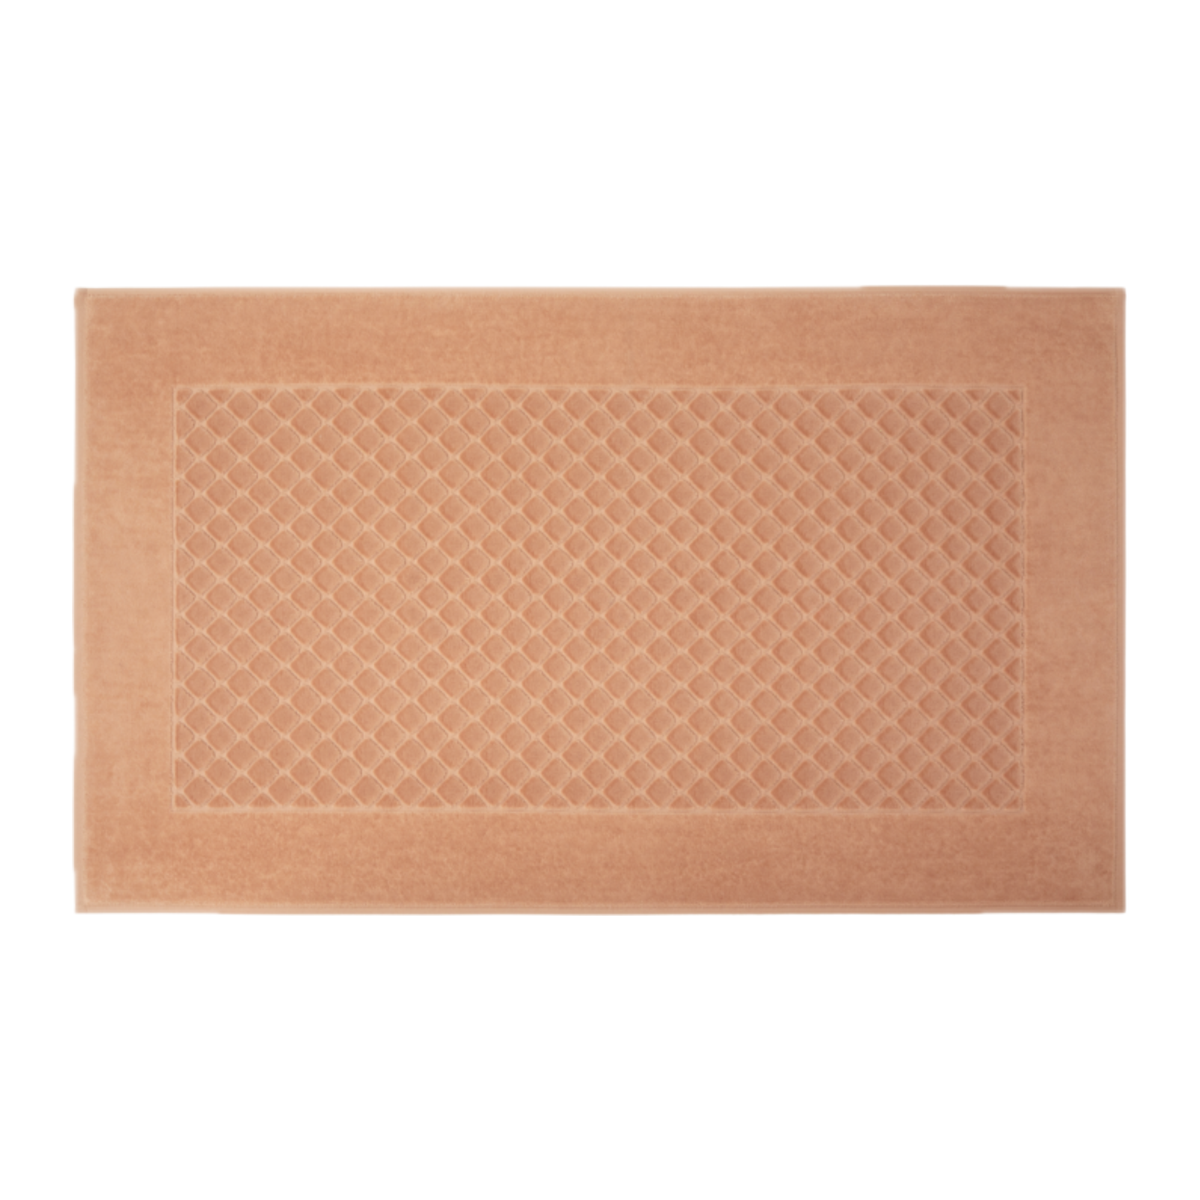 Bath Mat of Yves Delorme Etoile Bath Collection in Sienna Color